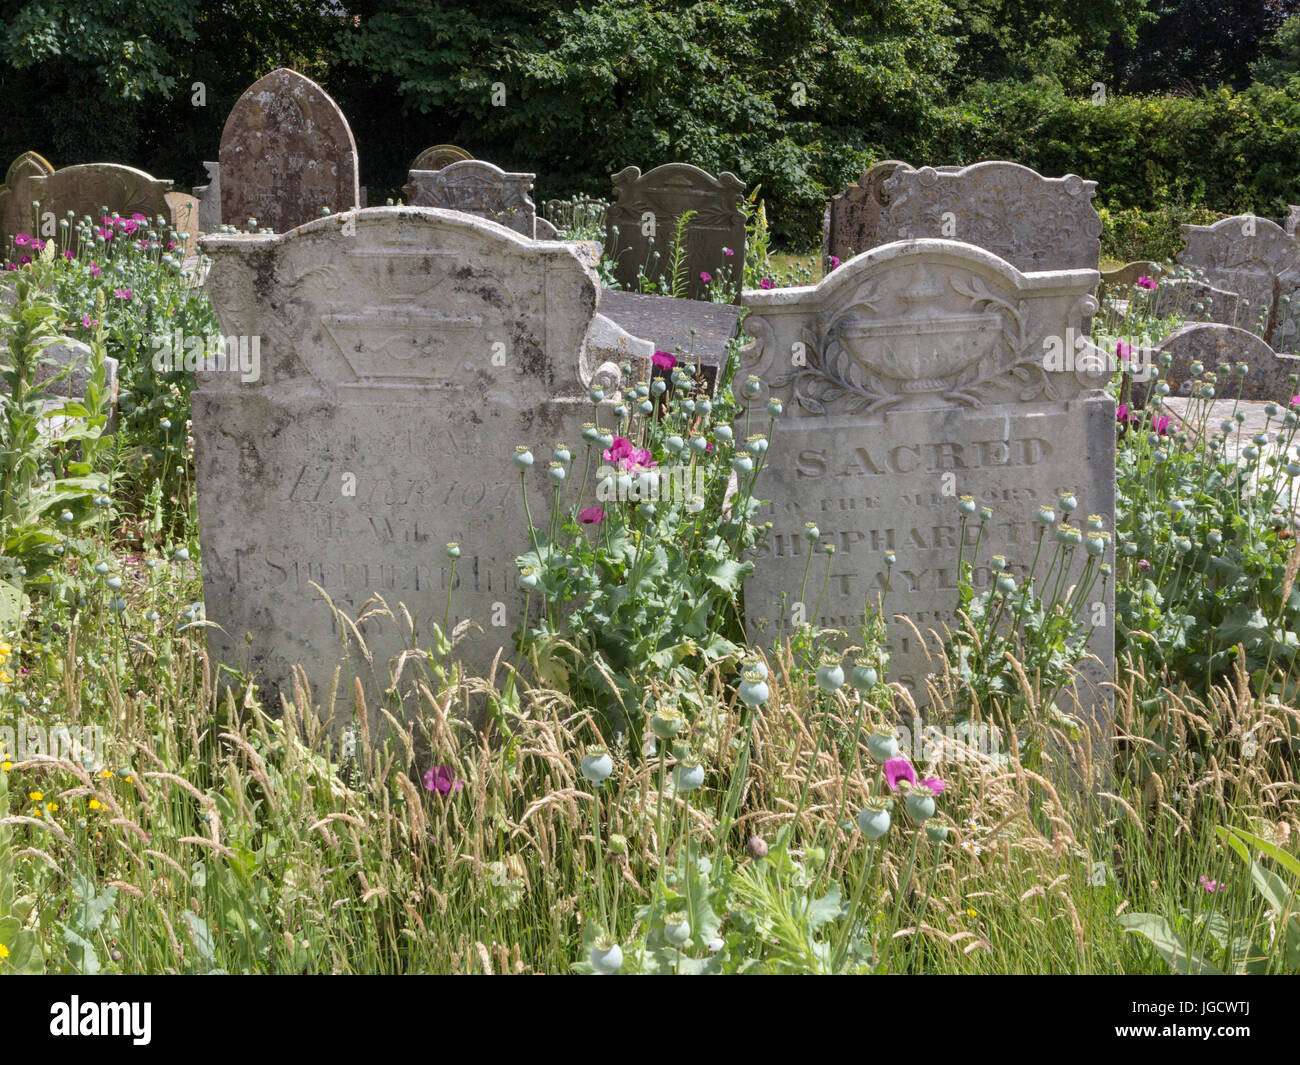 Headstones in a wildlife section of a cemetery with wild flowers and grasses Stock Photo